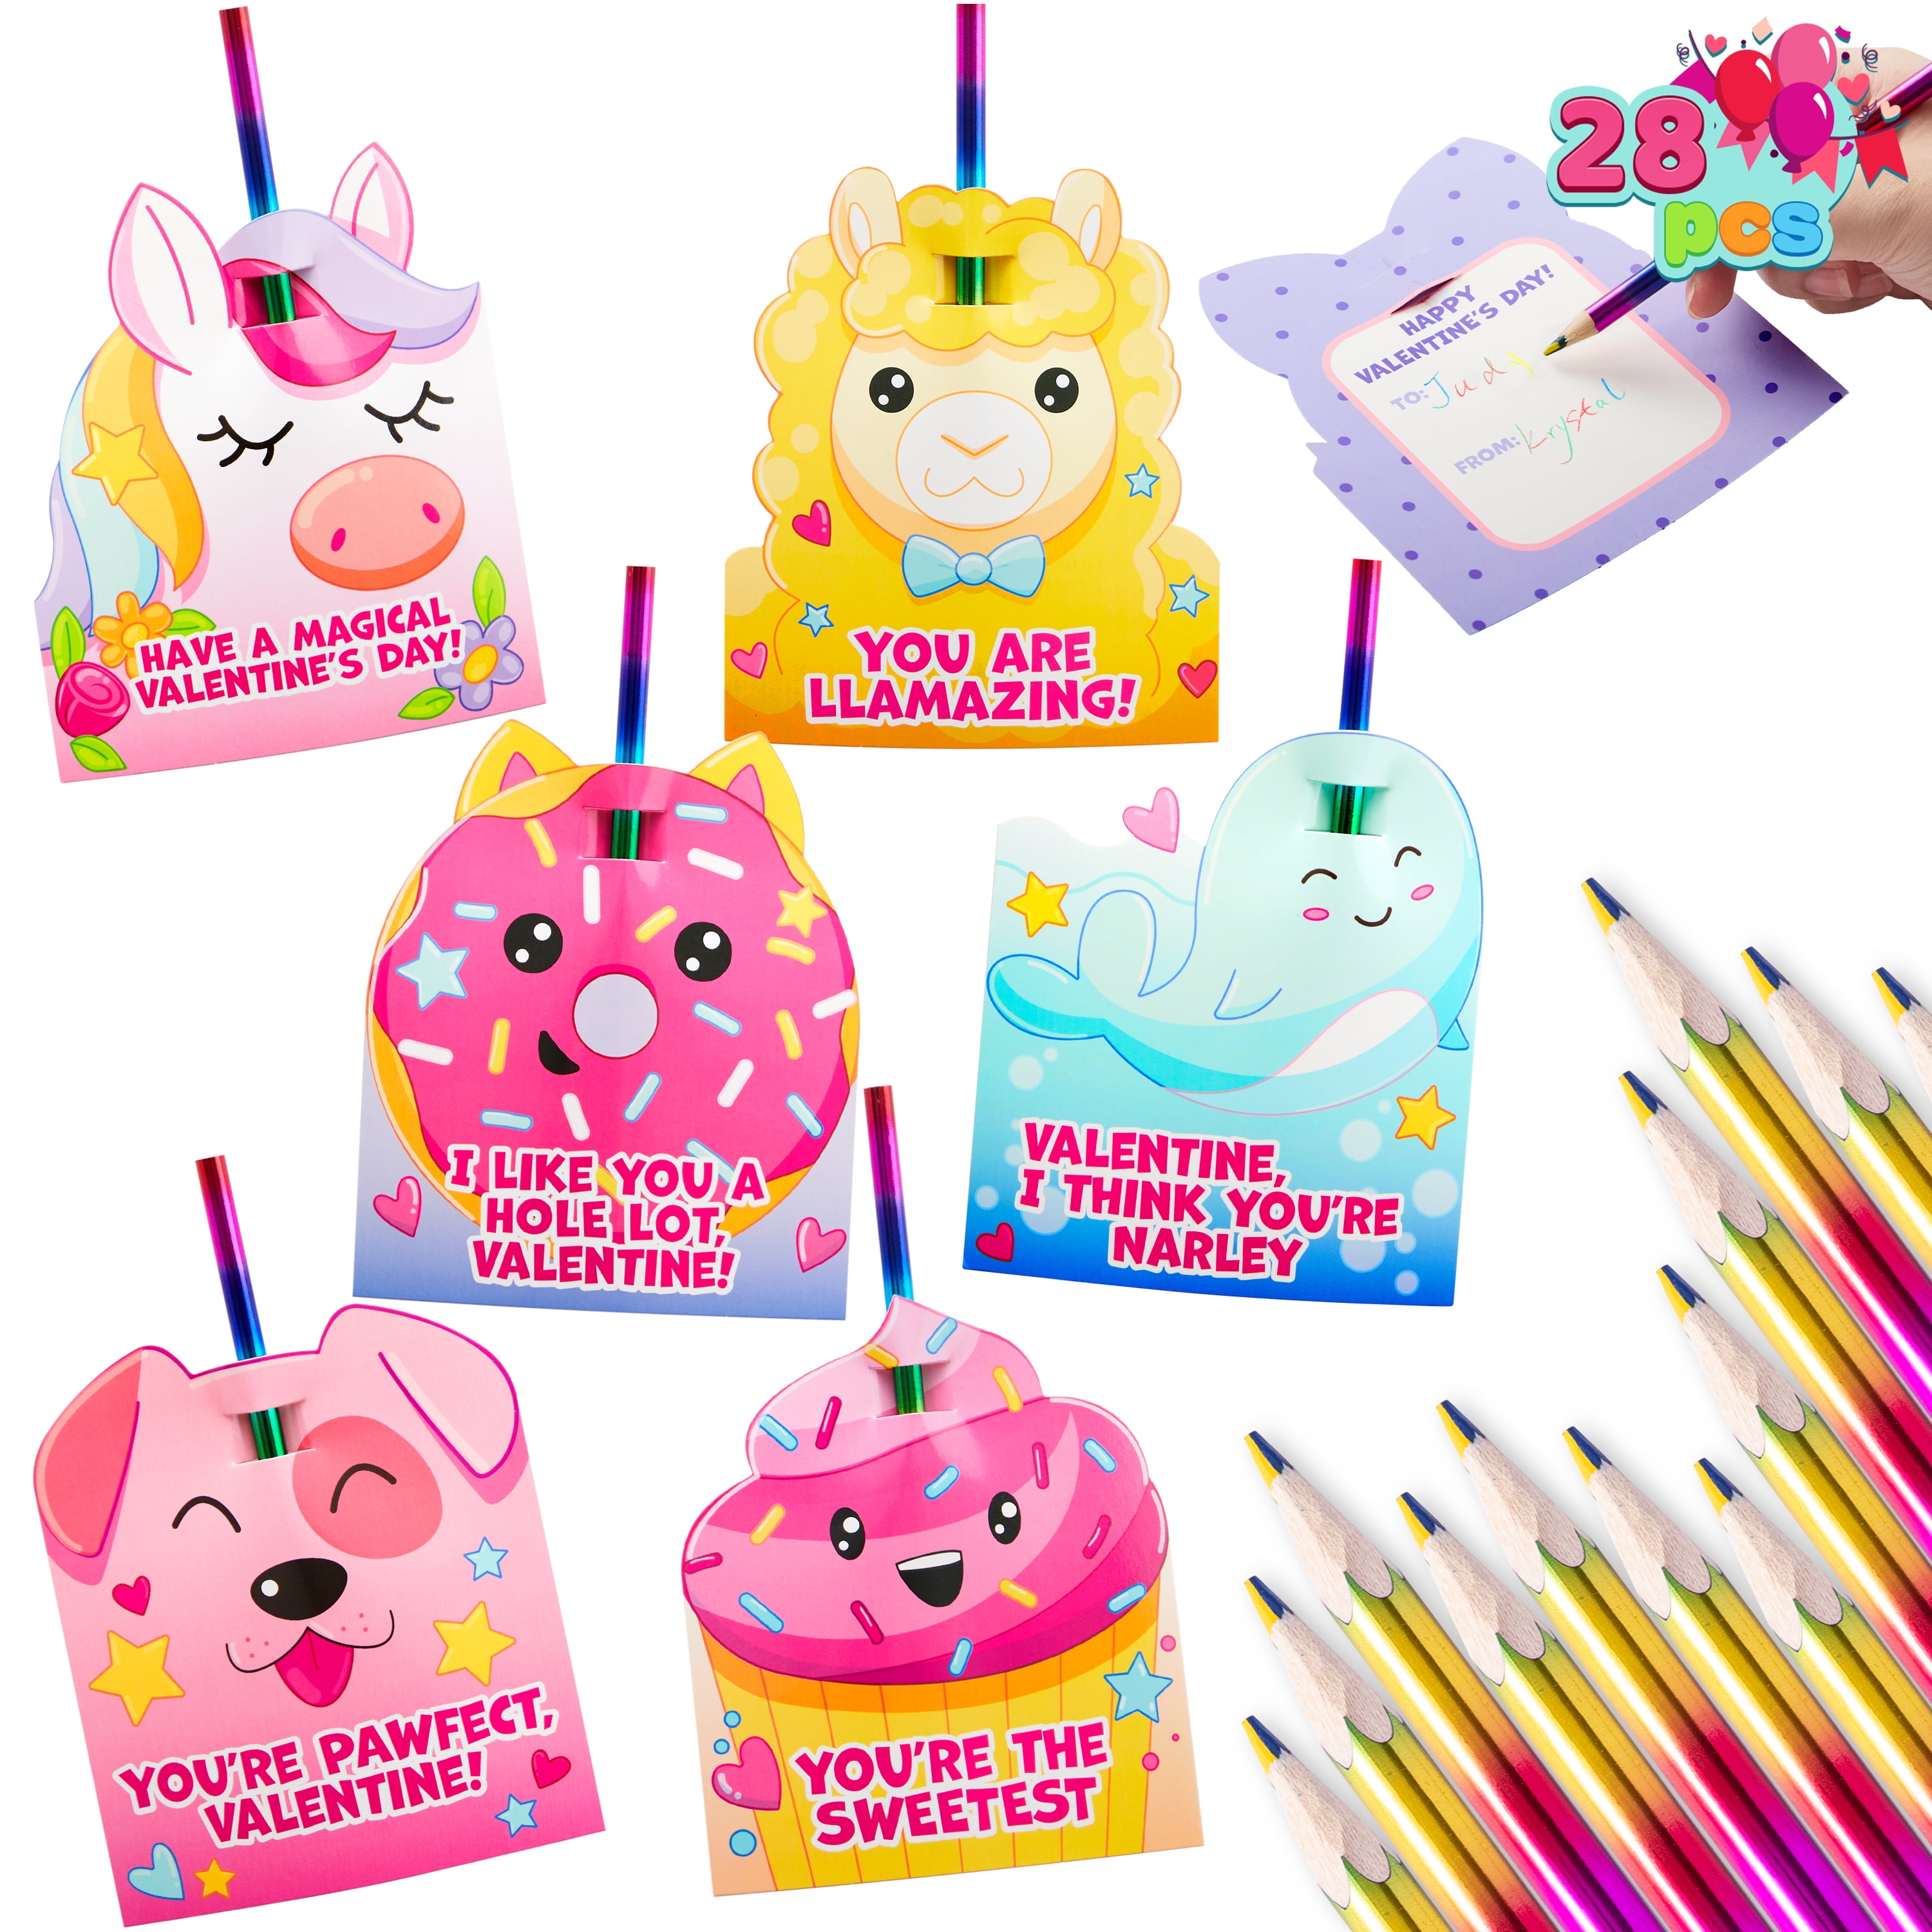 Syncfun 28 Pcs Valentine Day Pencils for Kids with Cards Unicorn